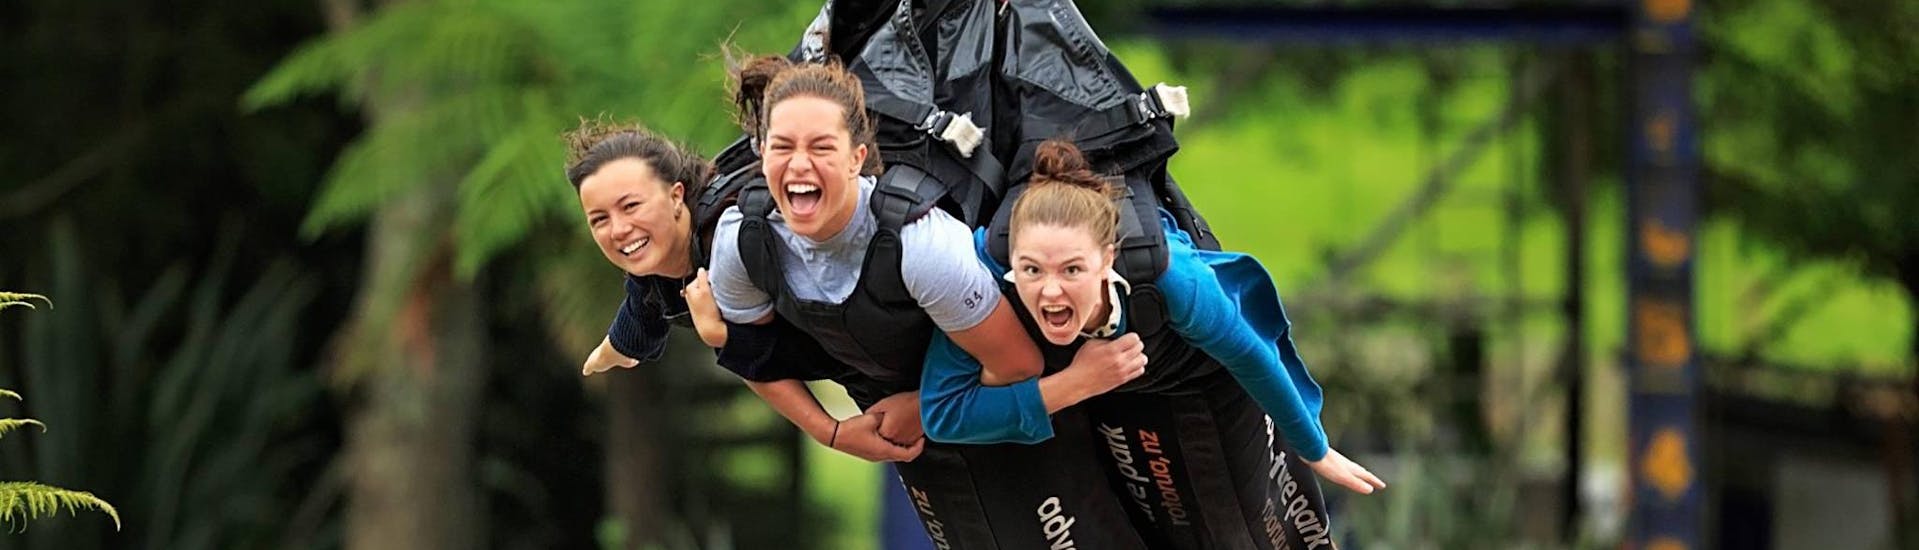 With a Multi-Ride Package with 2 or 4 Rides in Rotorua, three girls have chosen to try the thrilling swoop located in the Velocity Valley Rotorua Adventure Park.